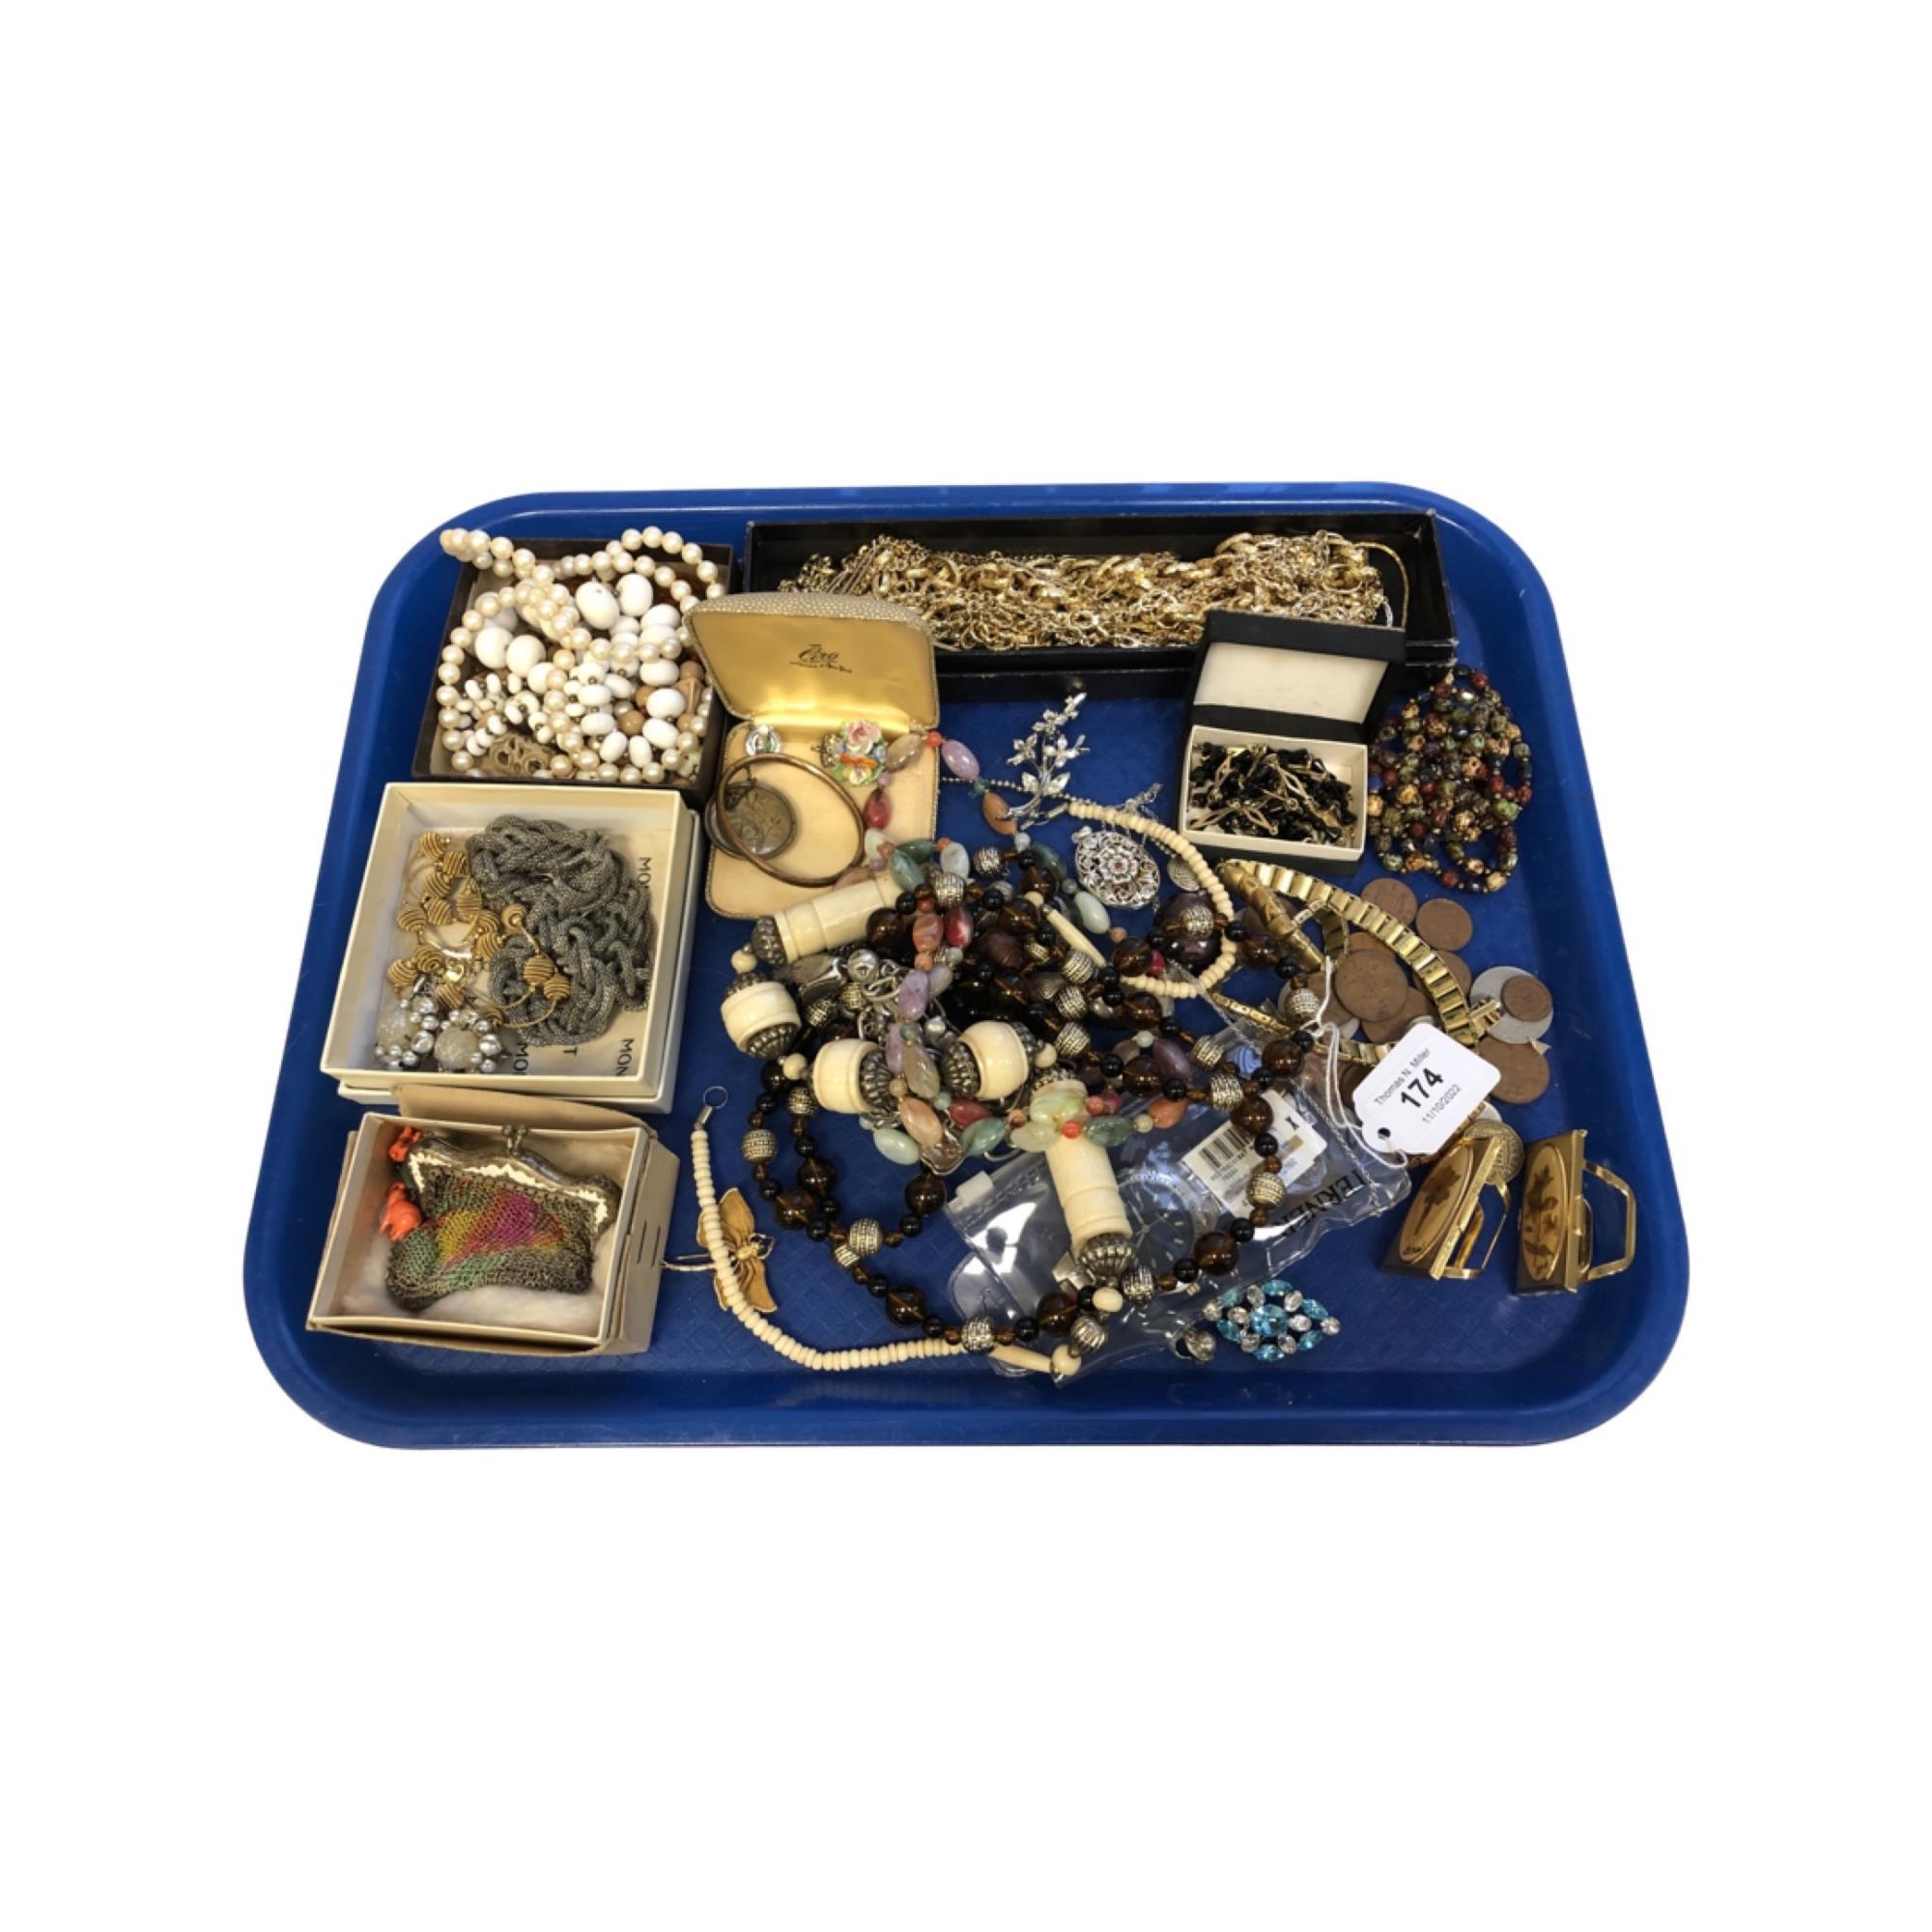 A tray of costume jewellery, coins, ornate silver locket etc.